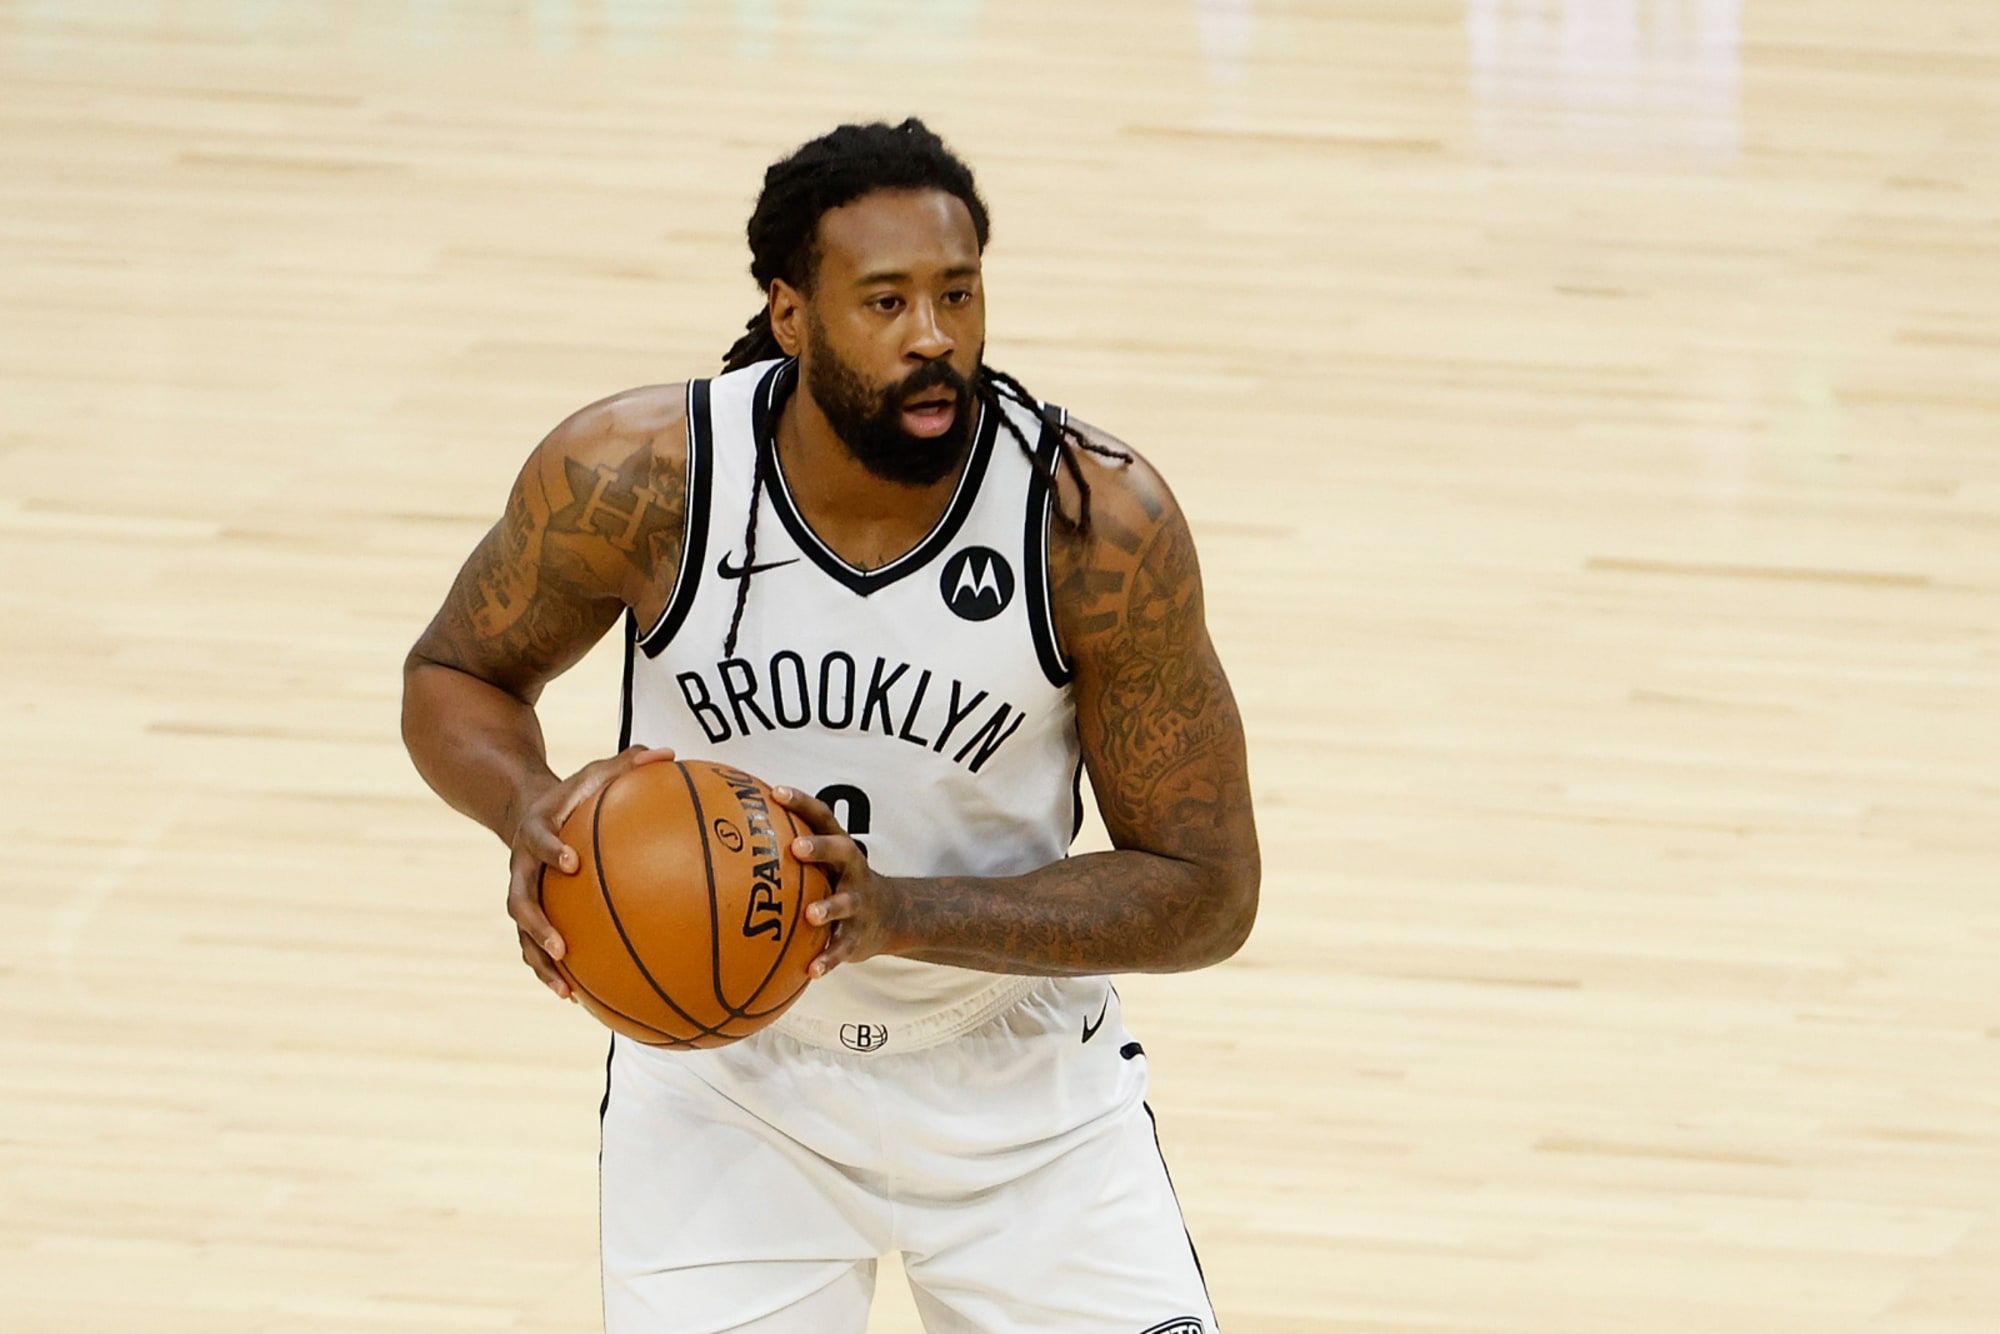 Nets: Jordan workout proves working on his defense